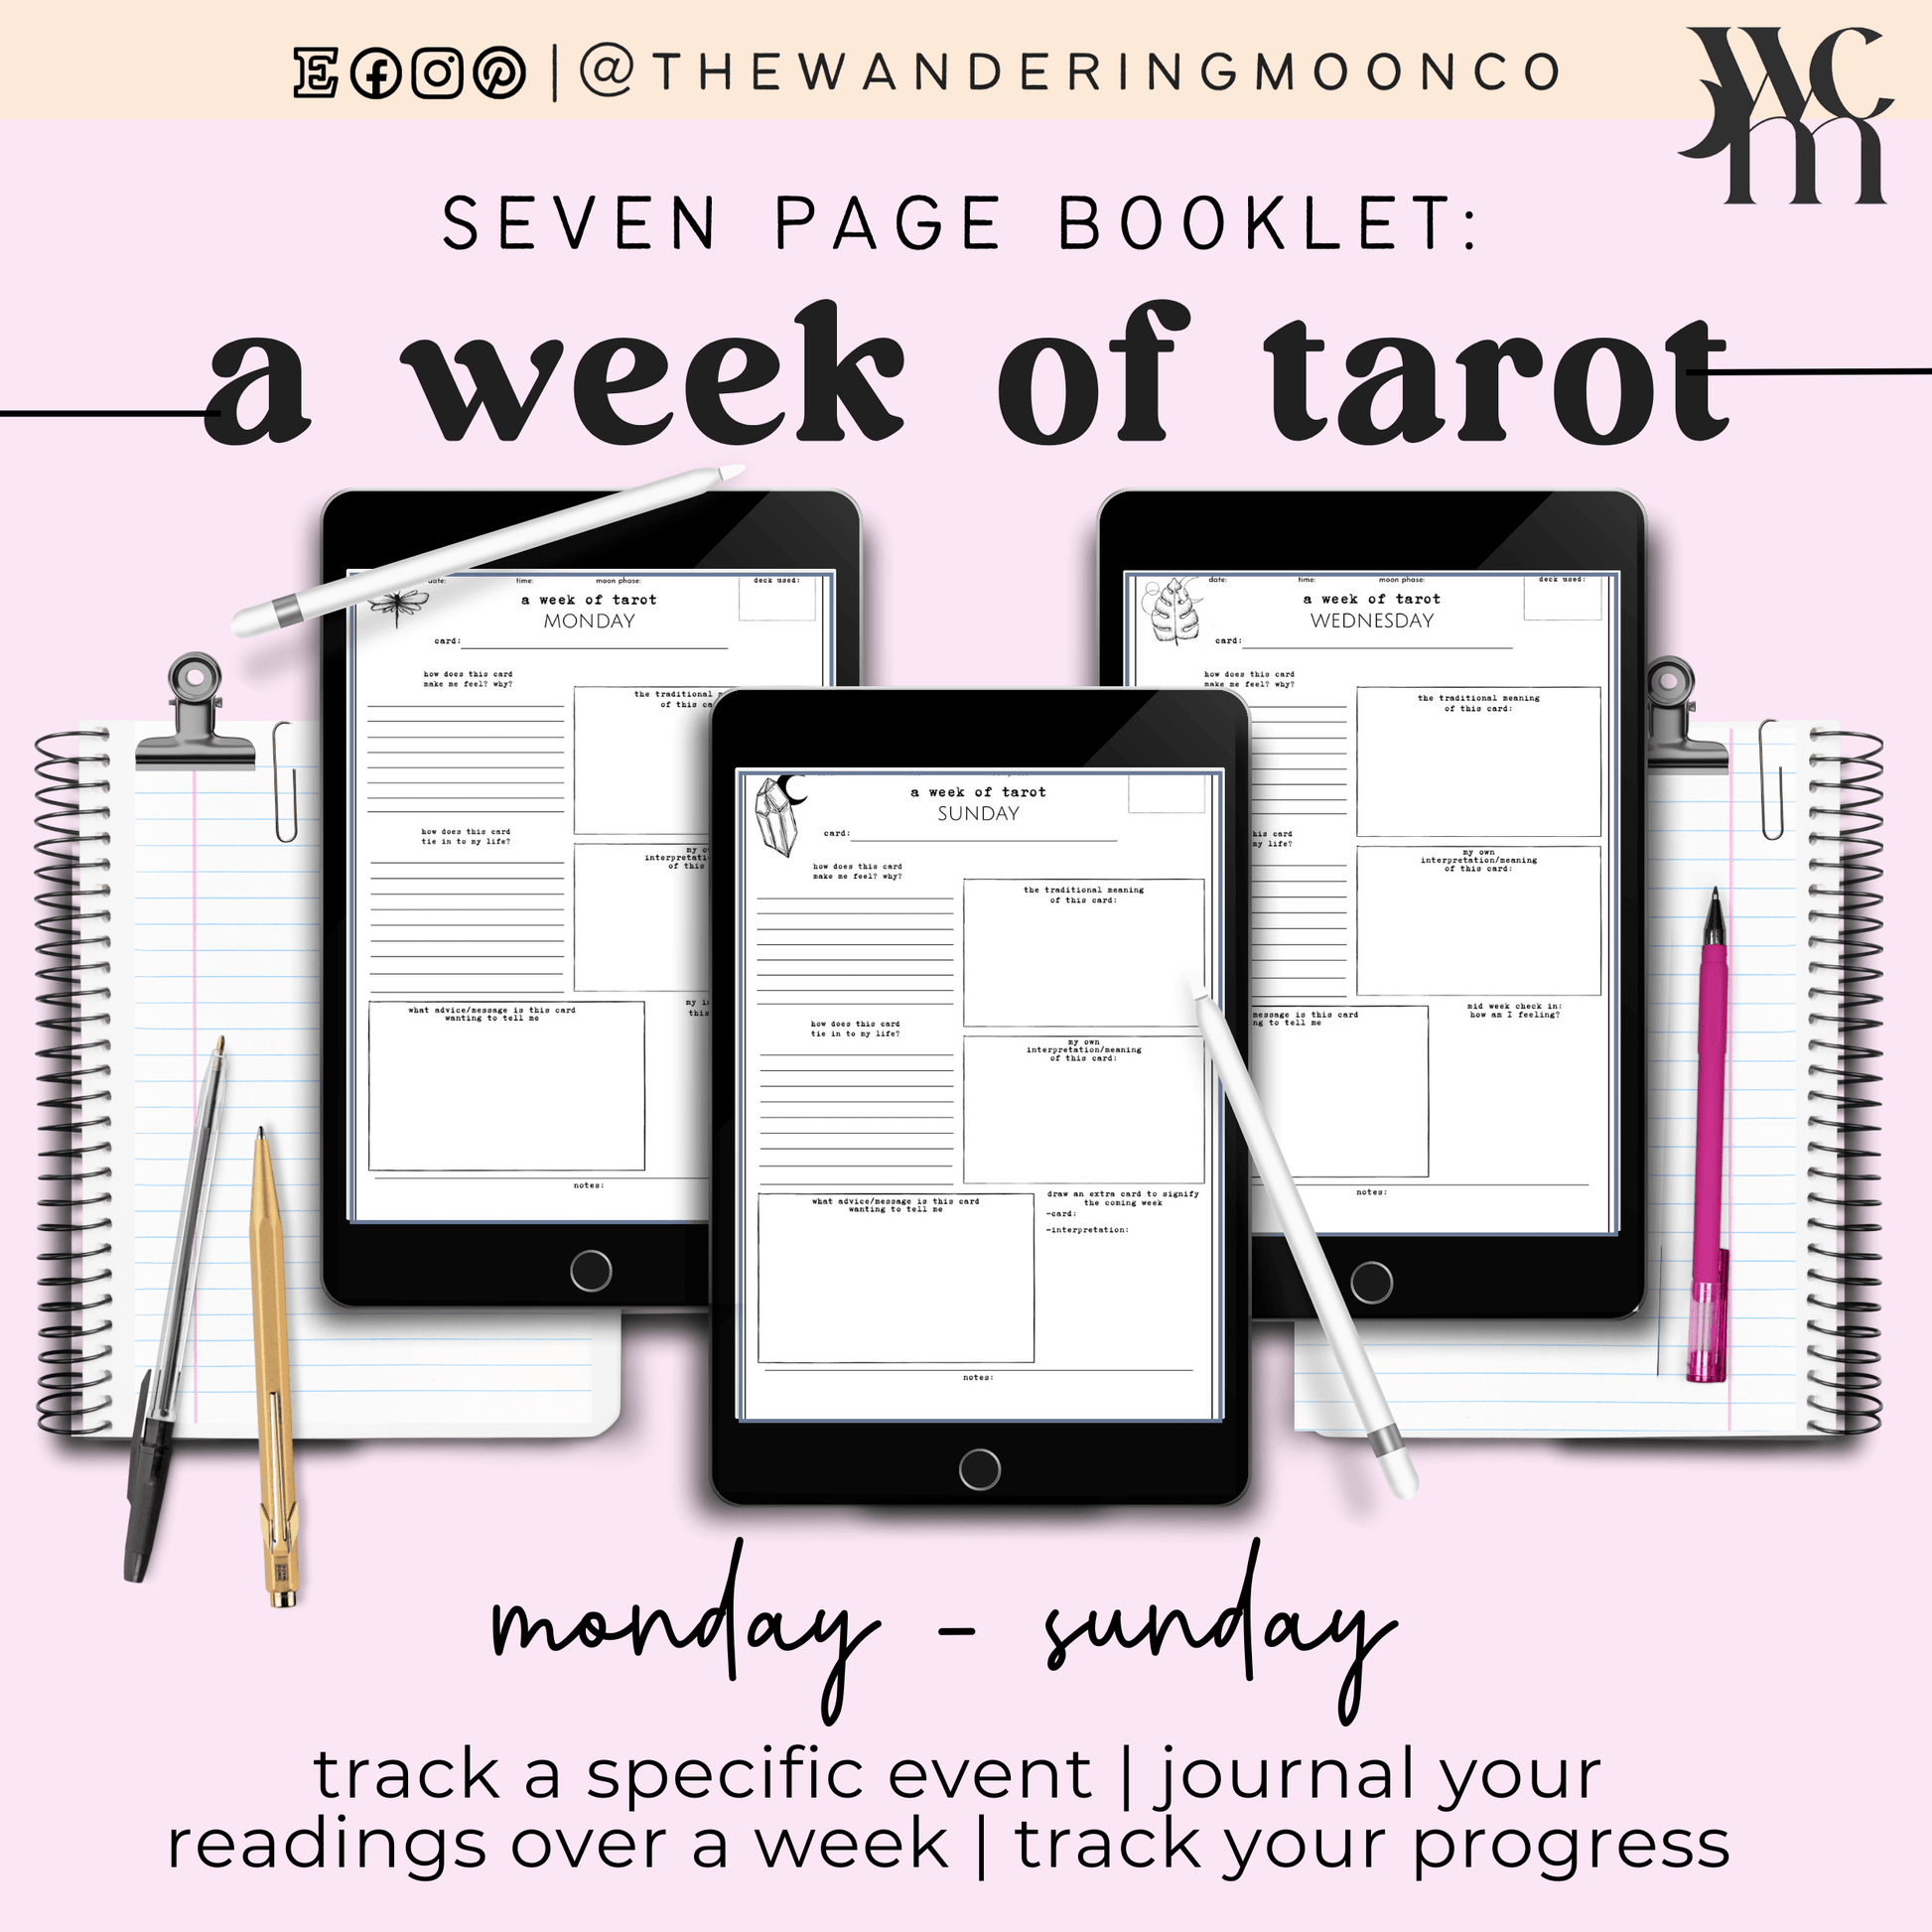 a graphic showing 3 pages from the week of tarot journal